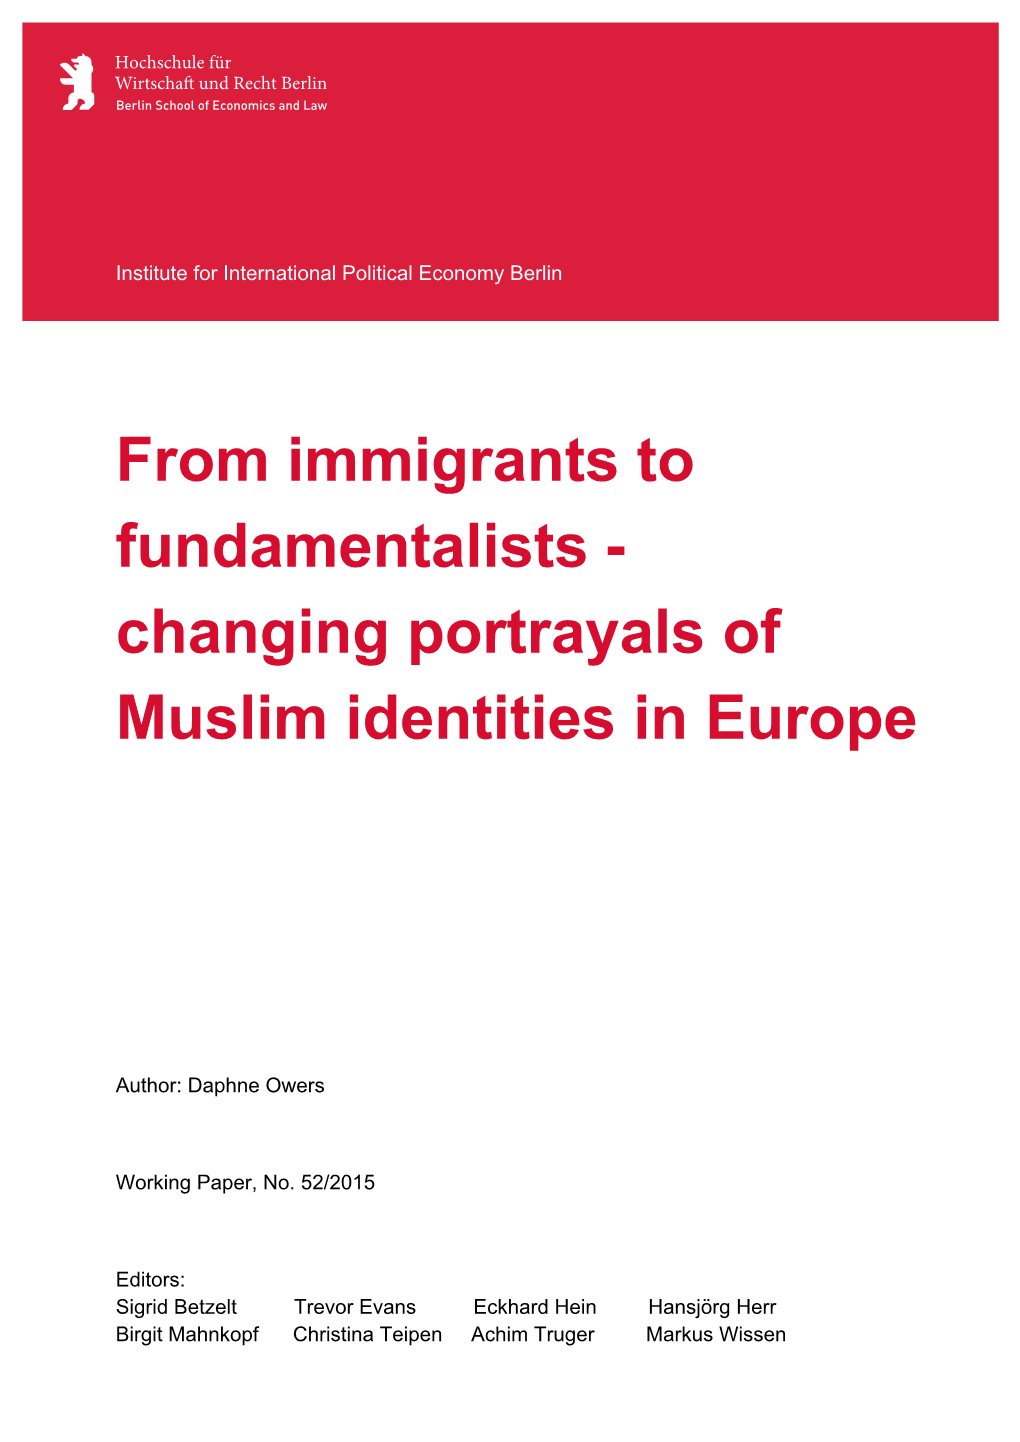 From Immigrants to Fundamentalists - Changing Portrayals of Muslim Identities in Europe